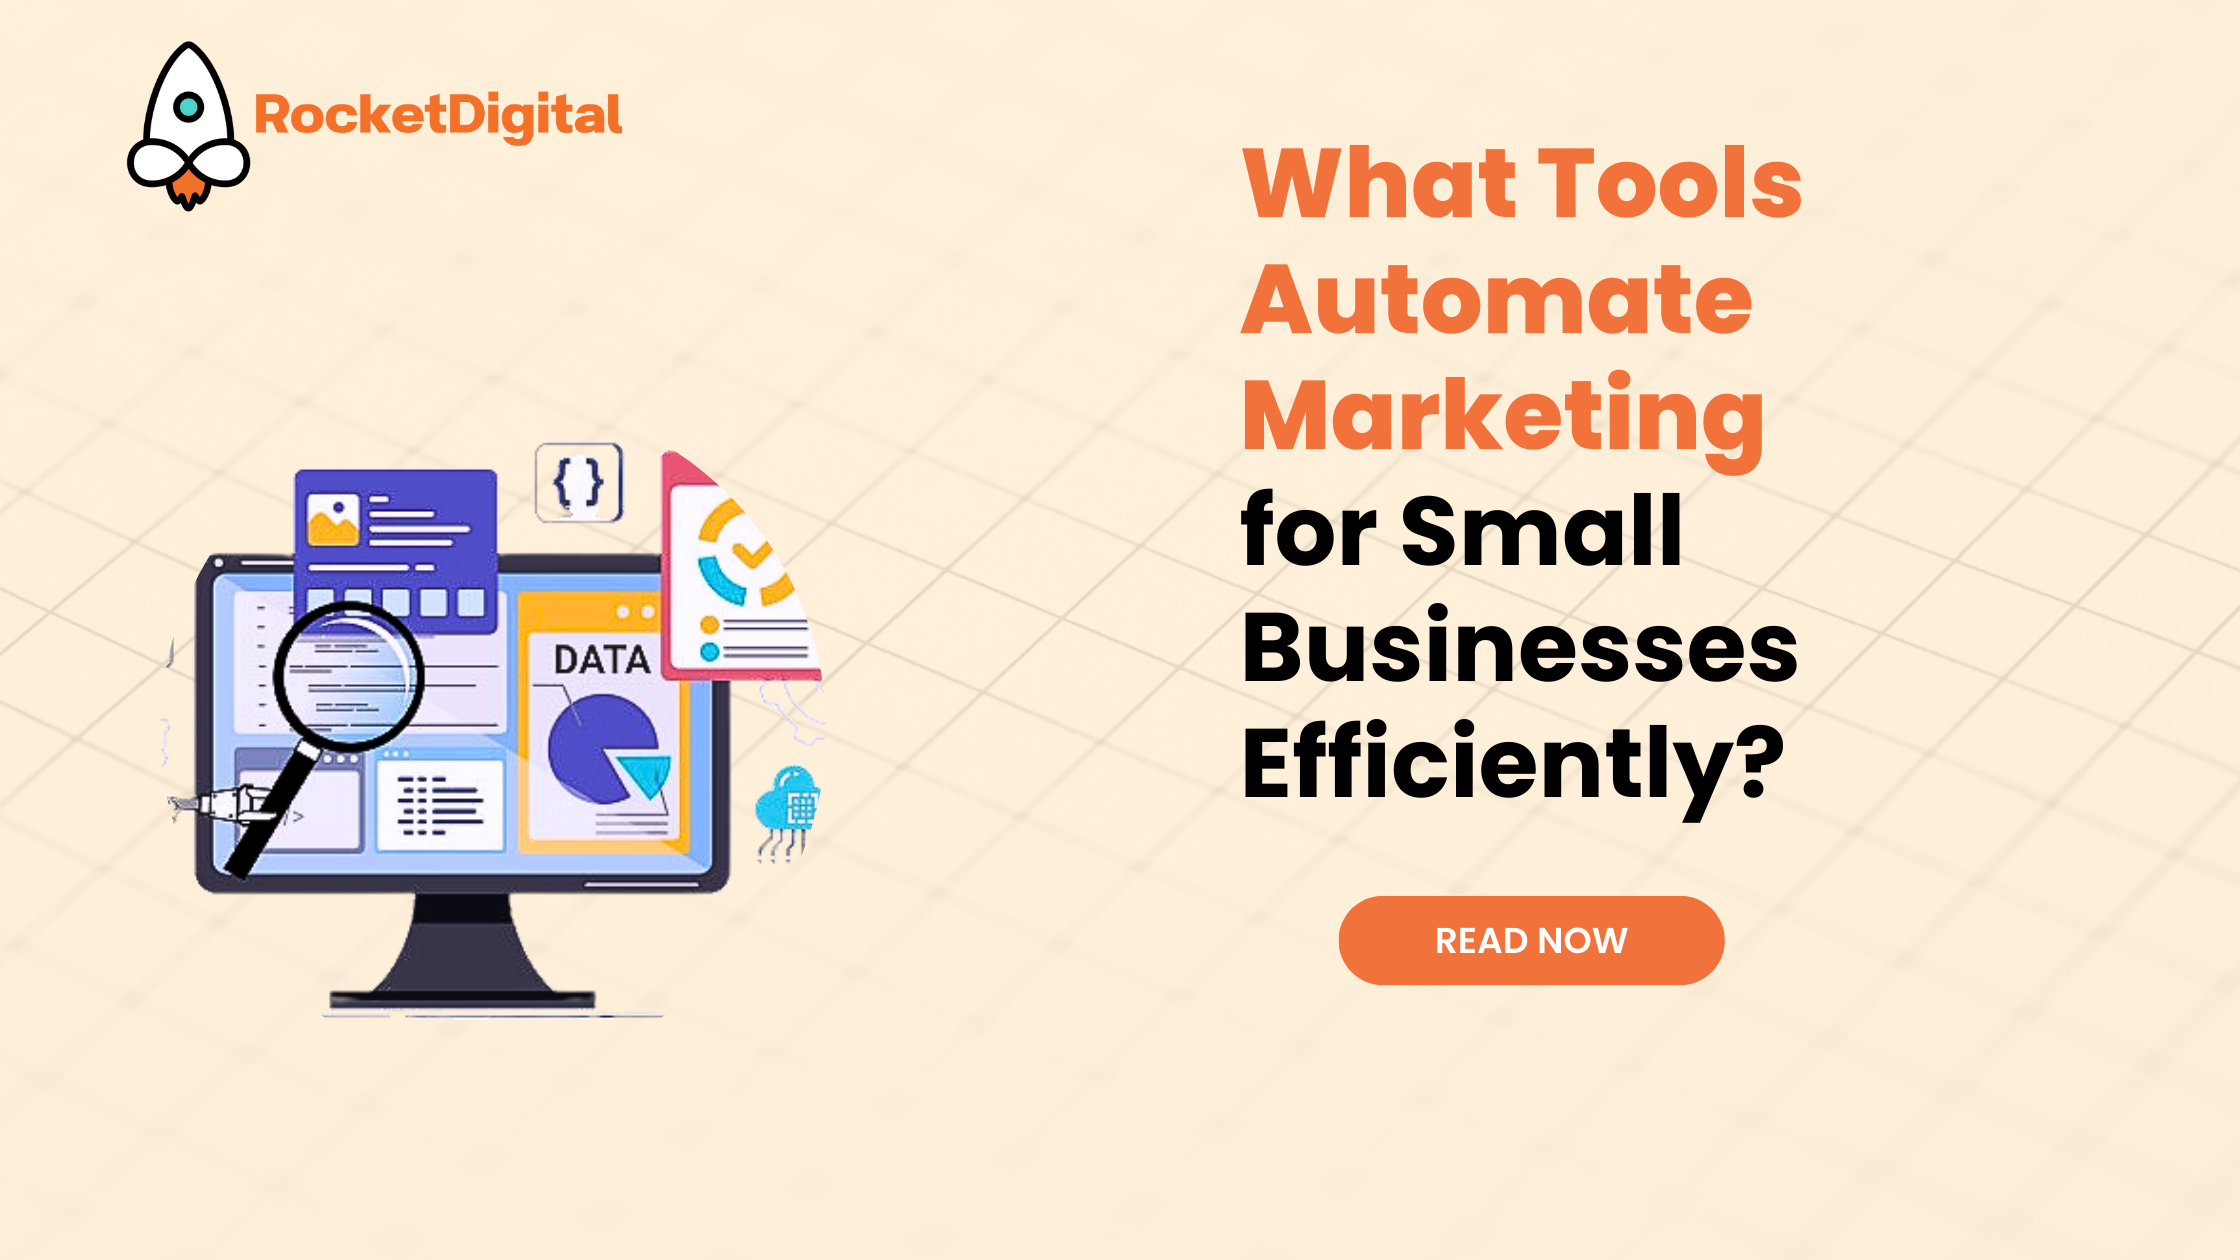 What Tools Automate Marketing for Small Businesses Efficiently?